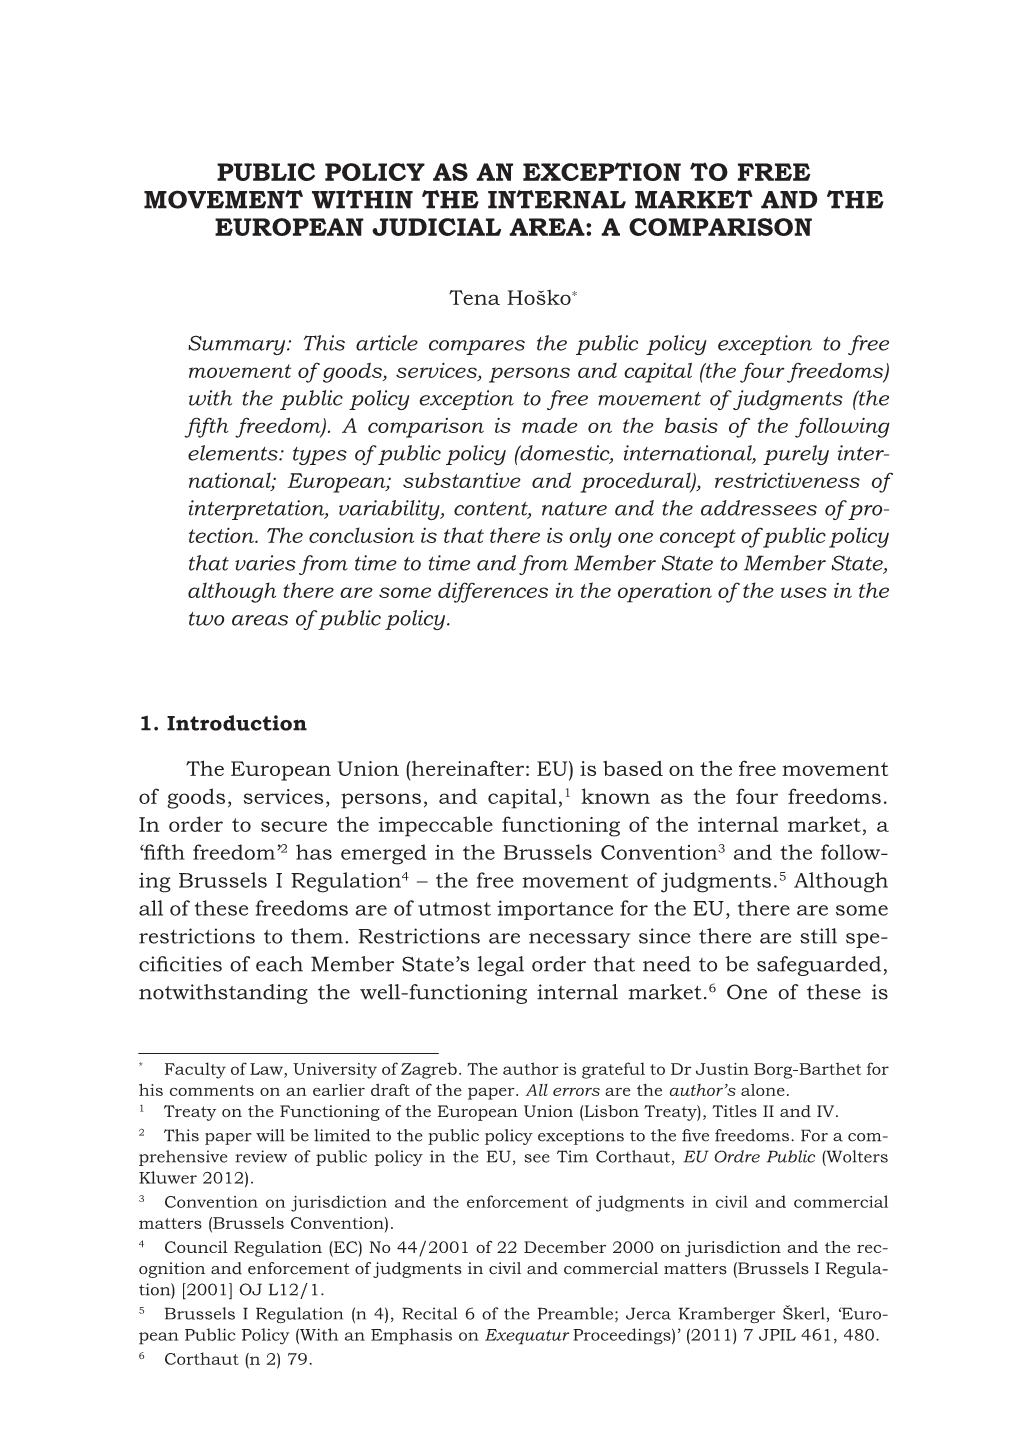 Public Policy As an Exception to Free Movement Within the Internal Market and the European Judicial Area: a Comparison